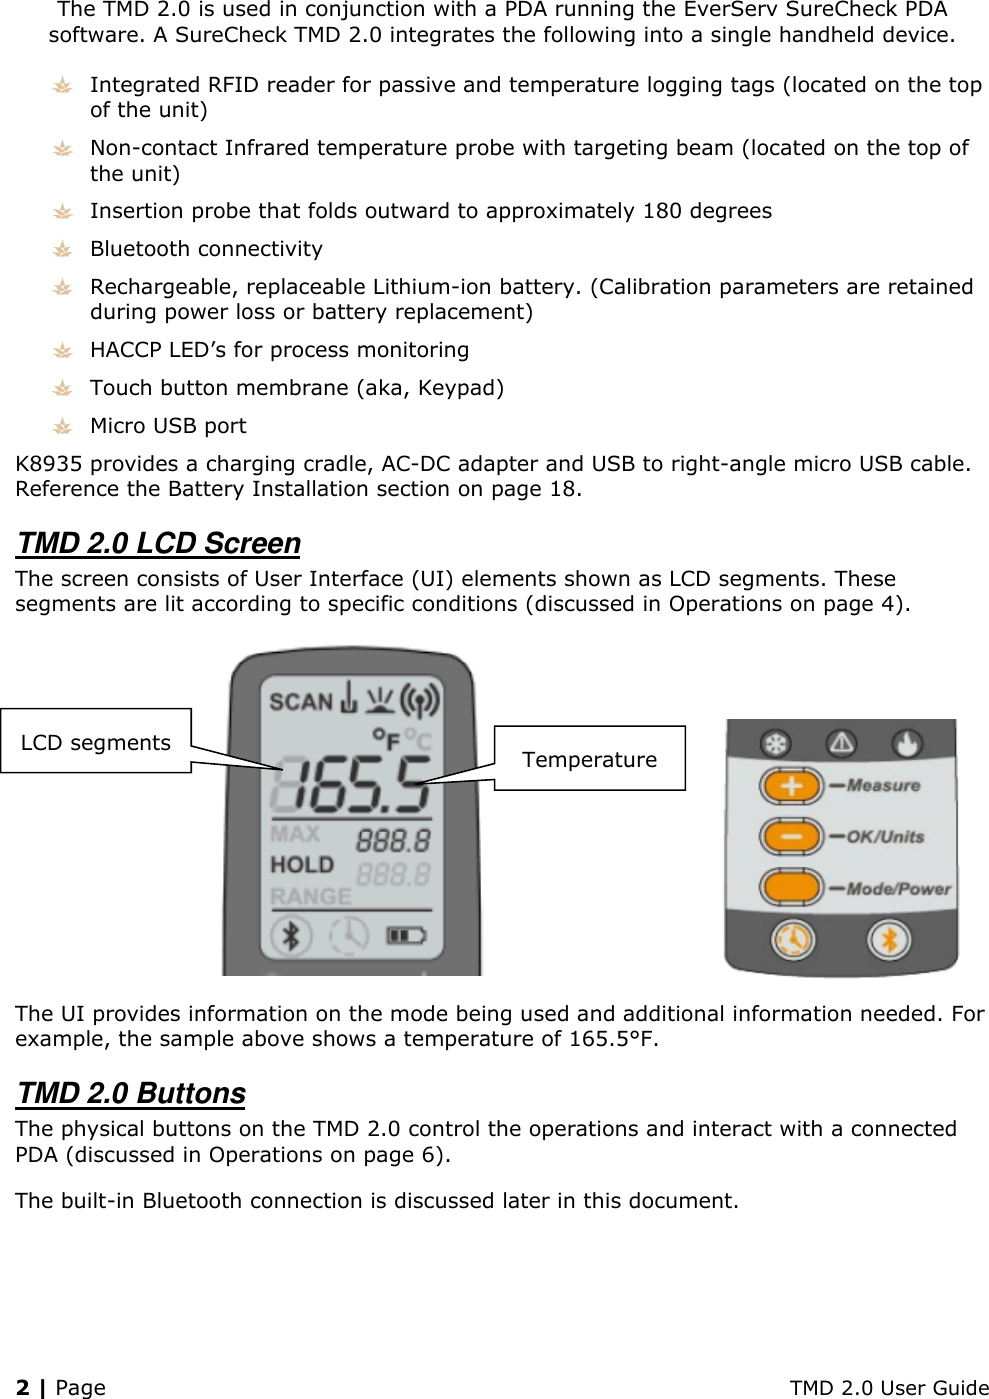 2 | Page    TMD 2.0 User Guide The TMD 2.0 is used in conjunction with a PDA running the EverServ SureCheck PDA software. A SureCheck TMD 2.0 integrates the following into a single handheld device.  Integrated RFID reader for passive and temperature logging tags (located on the top of the unit)  Non-contact Infrared temperature probe with targeting beam (located on the top of the unit)  Insertion probe that folds outward to approximately 180 degrees  Bluetooth connectivity  Rechargeable, replaceable Lithium-ion battery. (Calibration parameters are retained during power loss or battery replacement)  HACCP LED’s for process monitoring  Touch button membrane (aka, Keypad)  Micro USB port K8935 provides a charging cradle, AC-DC adapter and USB to right-angle micro USB cable. Reference the Battery Installation section on page 18. TMD 2.0 LCD Screen The screen consists of User Interface (UI) elements shown as LCD segments. These segments are lit according to specific conditions (discussed in Operations on page 4).   The UI provides information on the mode being used and additional information needed. For example, the sample above shows a temperature of 165.5°F. TMD 2.0 Buttons The physical buttons on the TMD 2.0 control the operations and interact with a connected PDA (discussed in Operations on page 6).  The built-in Bluetooth connection is discussed later in this document. Temperature LCD segments 